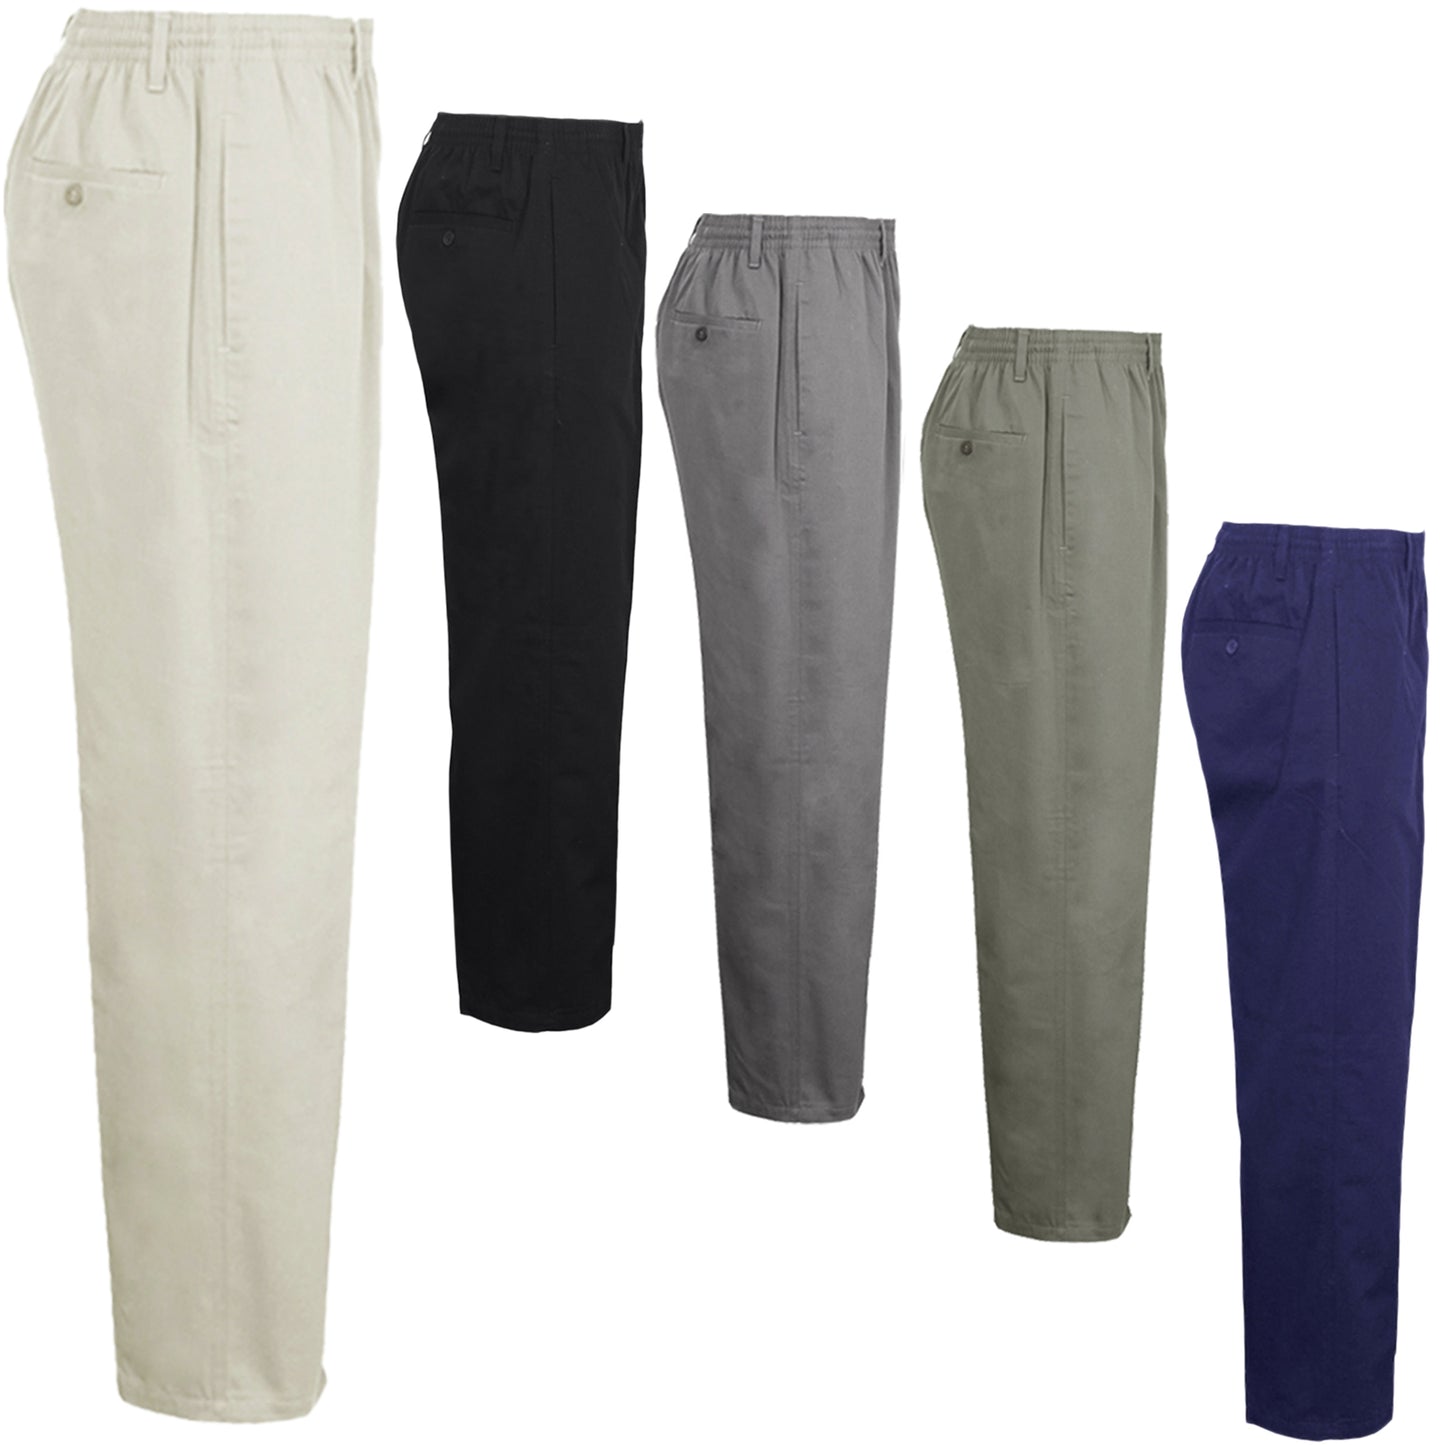 MENS RUGBY TROUSERS FULL ELASTICATED WAIST CASUAL SMART POCKET PANTS BIG PLUS SIZE 30" to 40"